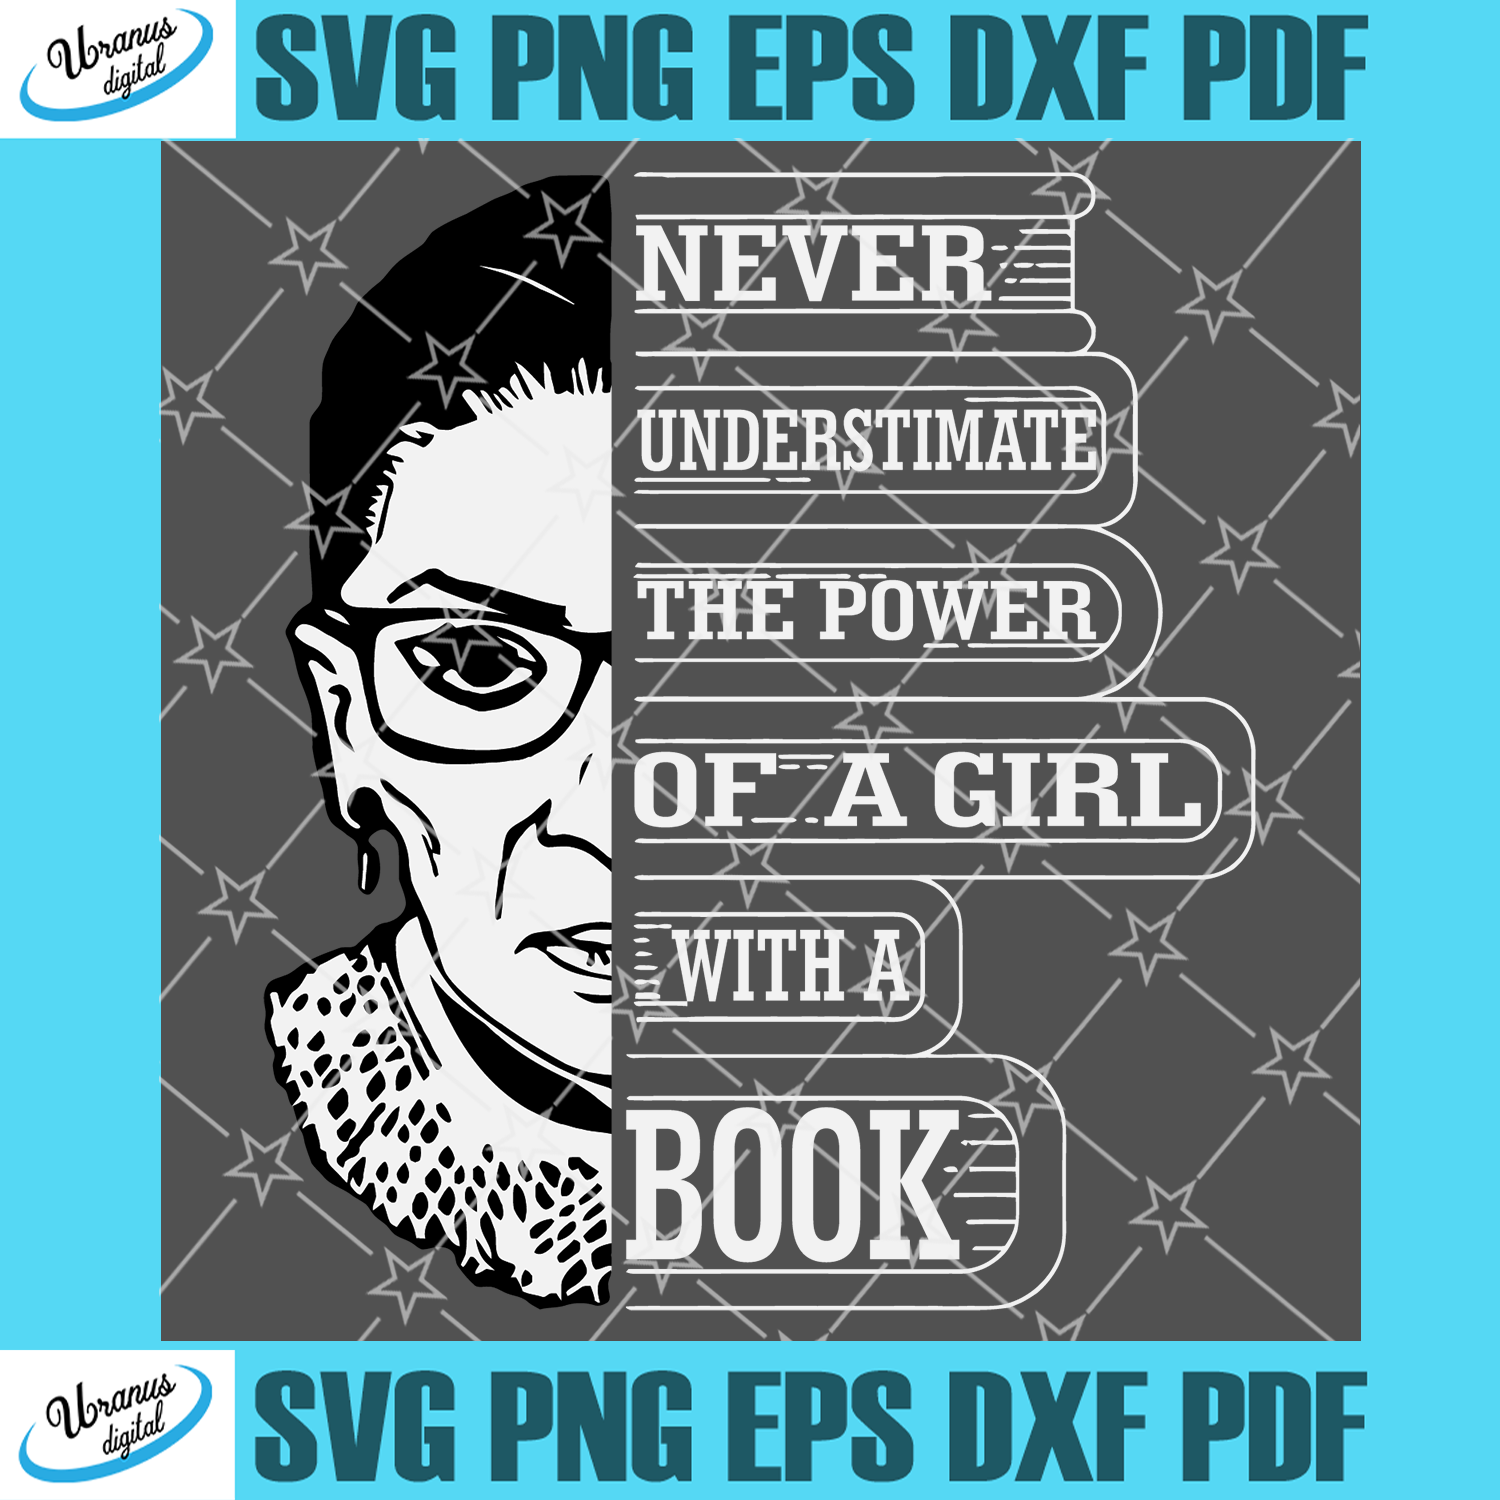 Download Trending Svg Svg Never Underestimate The Power Of A Girl With A Book Svg Rbg Shirt Ruth Bader Ginsburg Notorious Svg Feminism Protest Women Girl Power Equal Right Svg Empowermen Svg Cricut Silhouette Svg Files Cricut